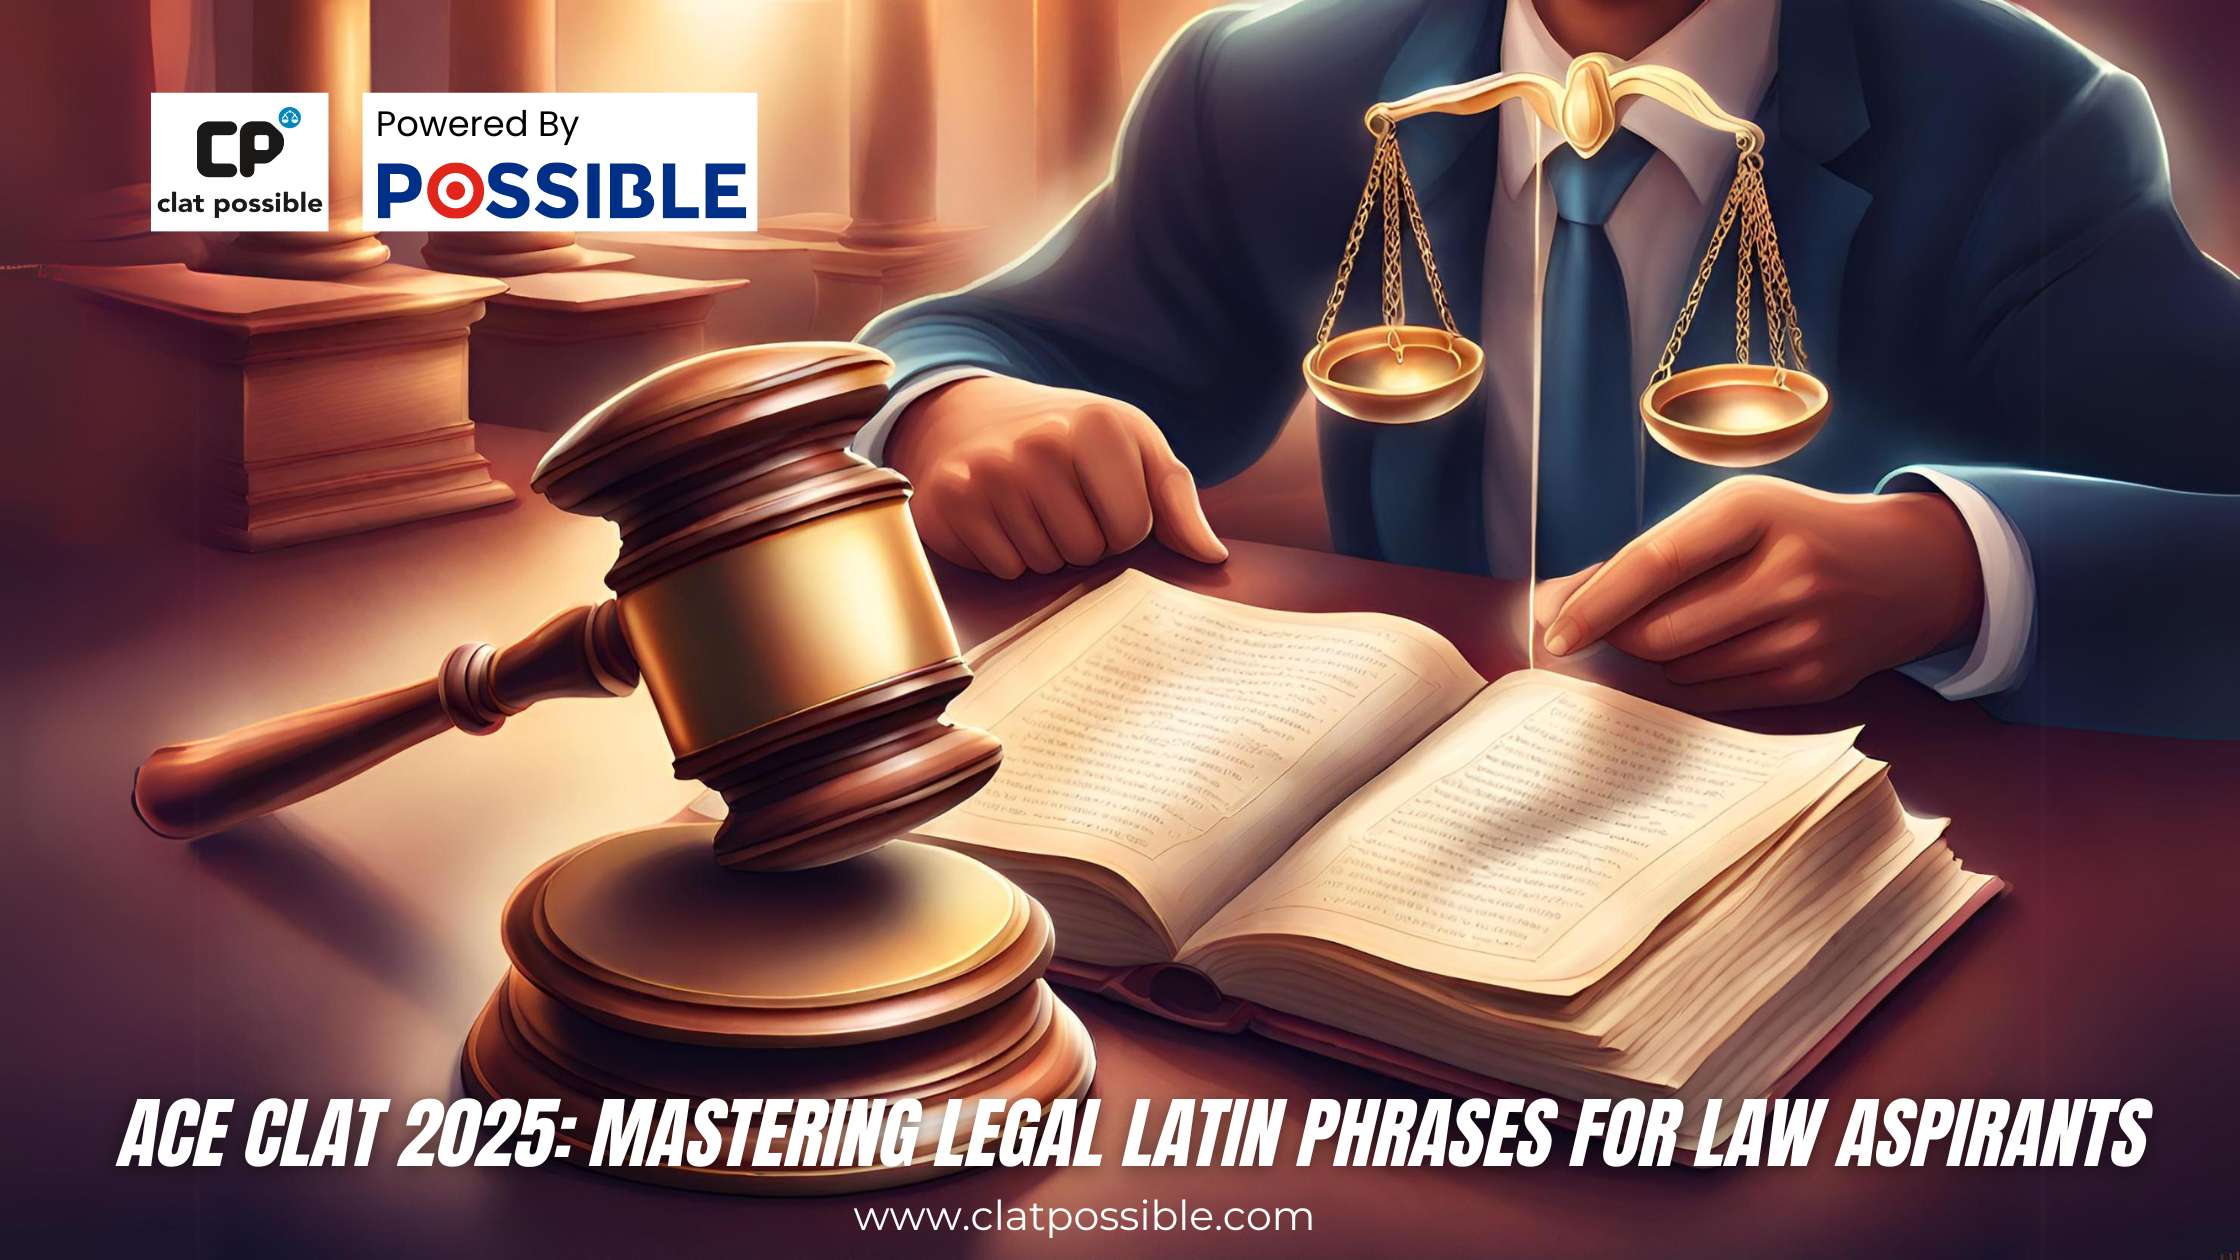 Ace CLAT 2025: Mastering Legal Latin Phrases for Law Aspirants